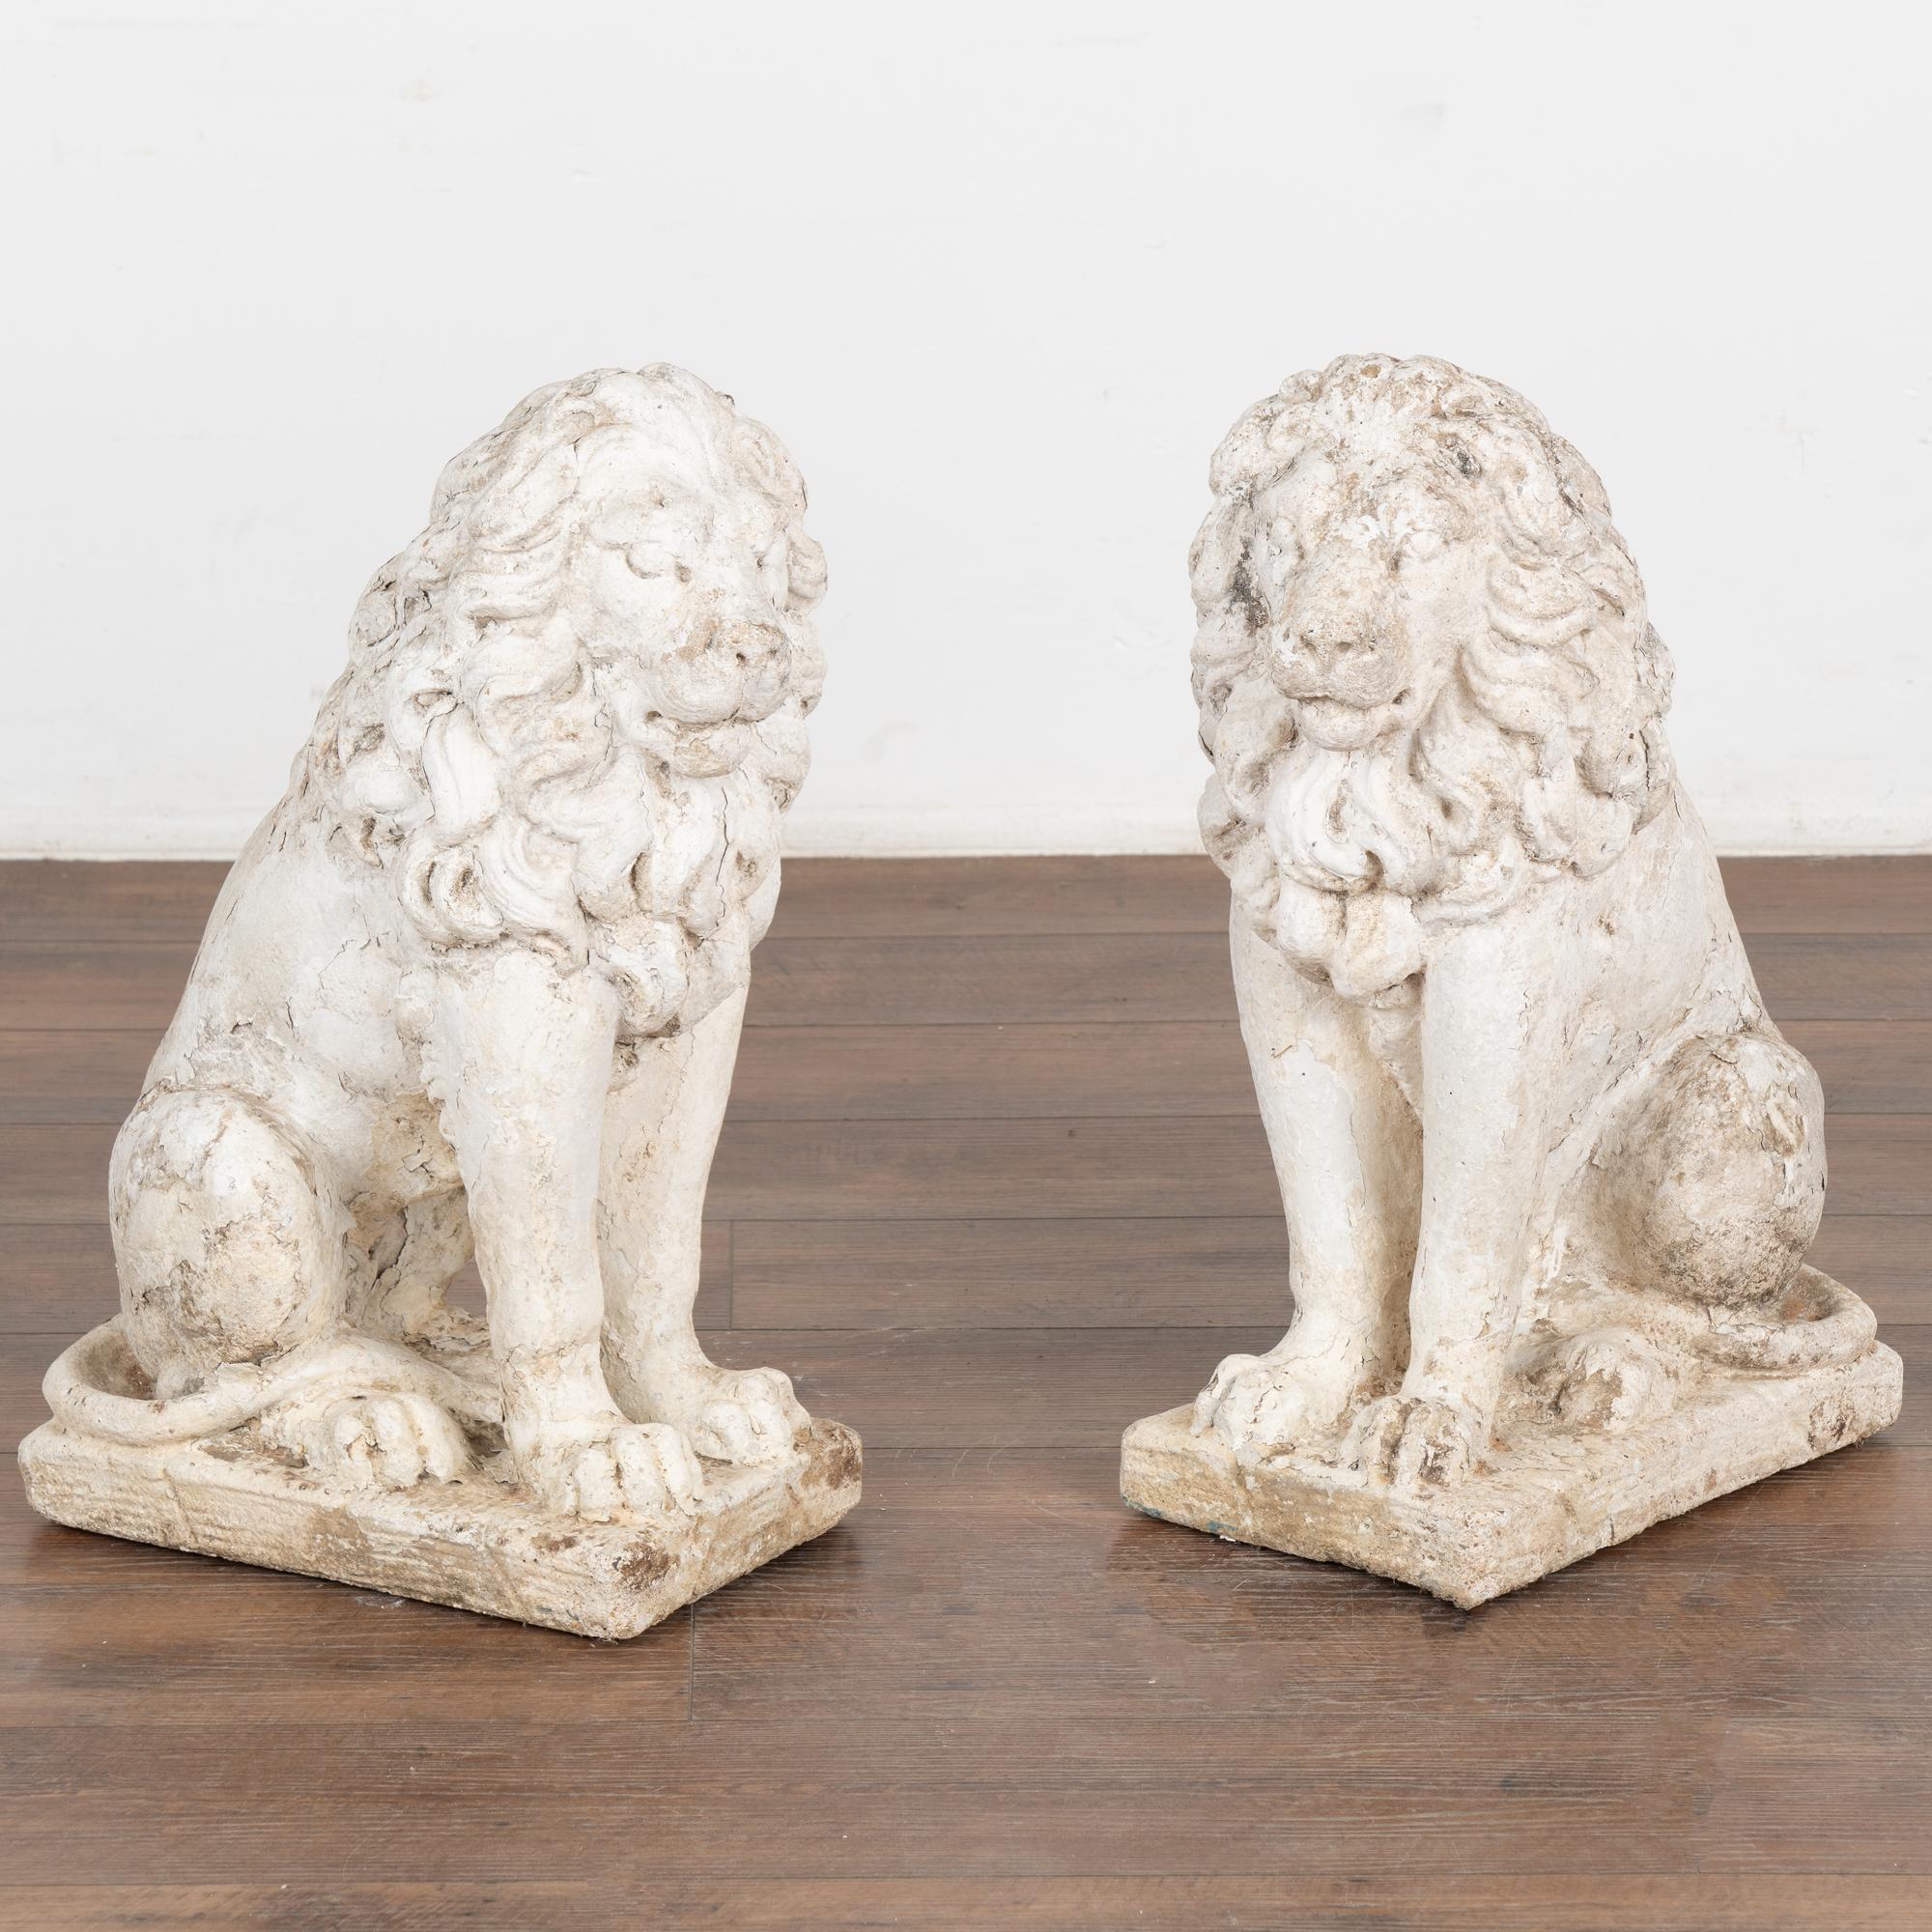 Pair, lion statues carved in limestone and painted white. Male lions with impressive manes are in sitting position.
The aged patina including distress to finish, wear, old lichen/stains, cracks, peeling paint all reflect generations of sitting